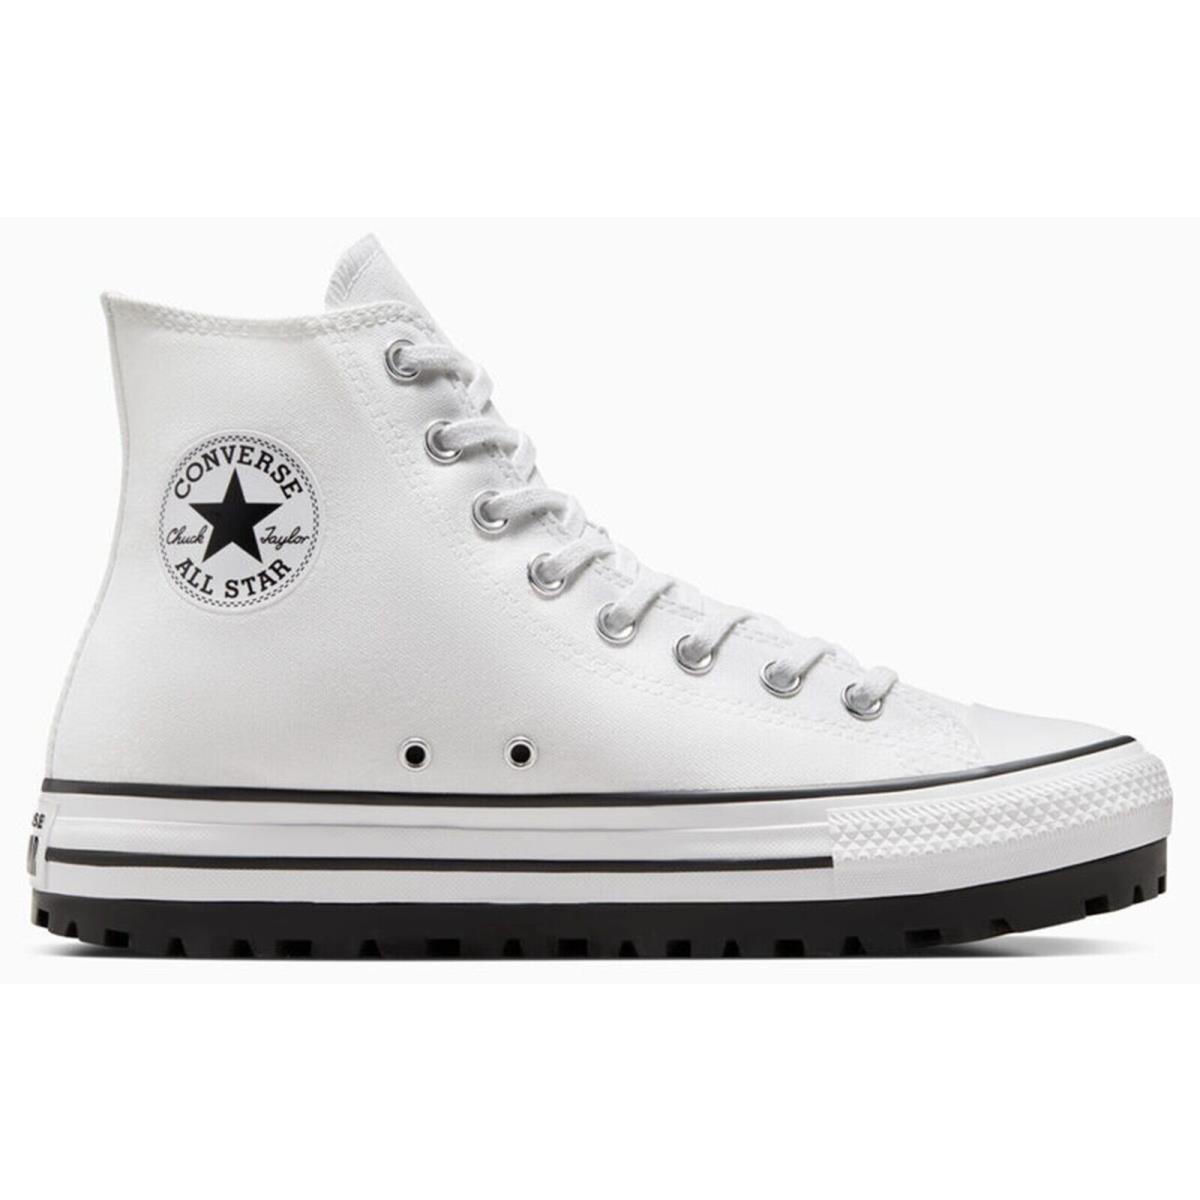 Converse Chuck Taylor All Star City Trek Traction Rubber Outsole Men`s Shoes White